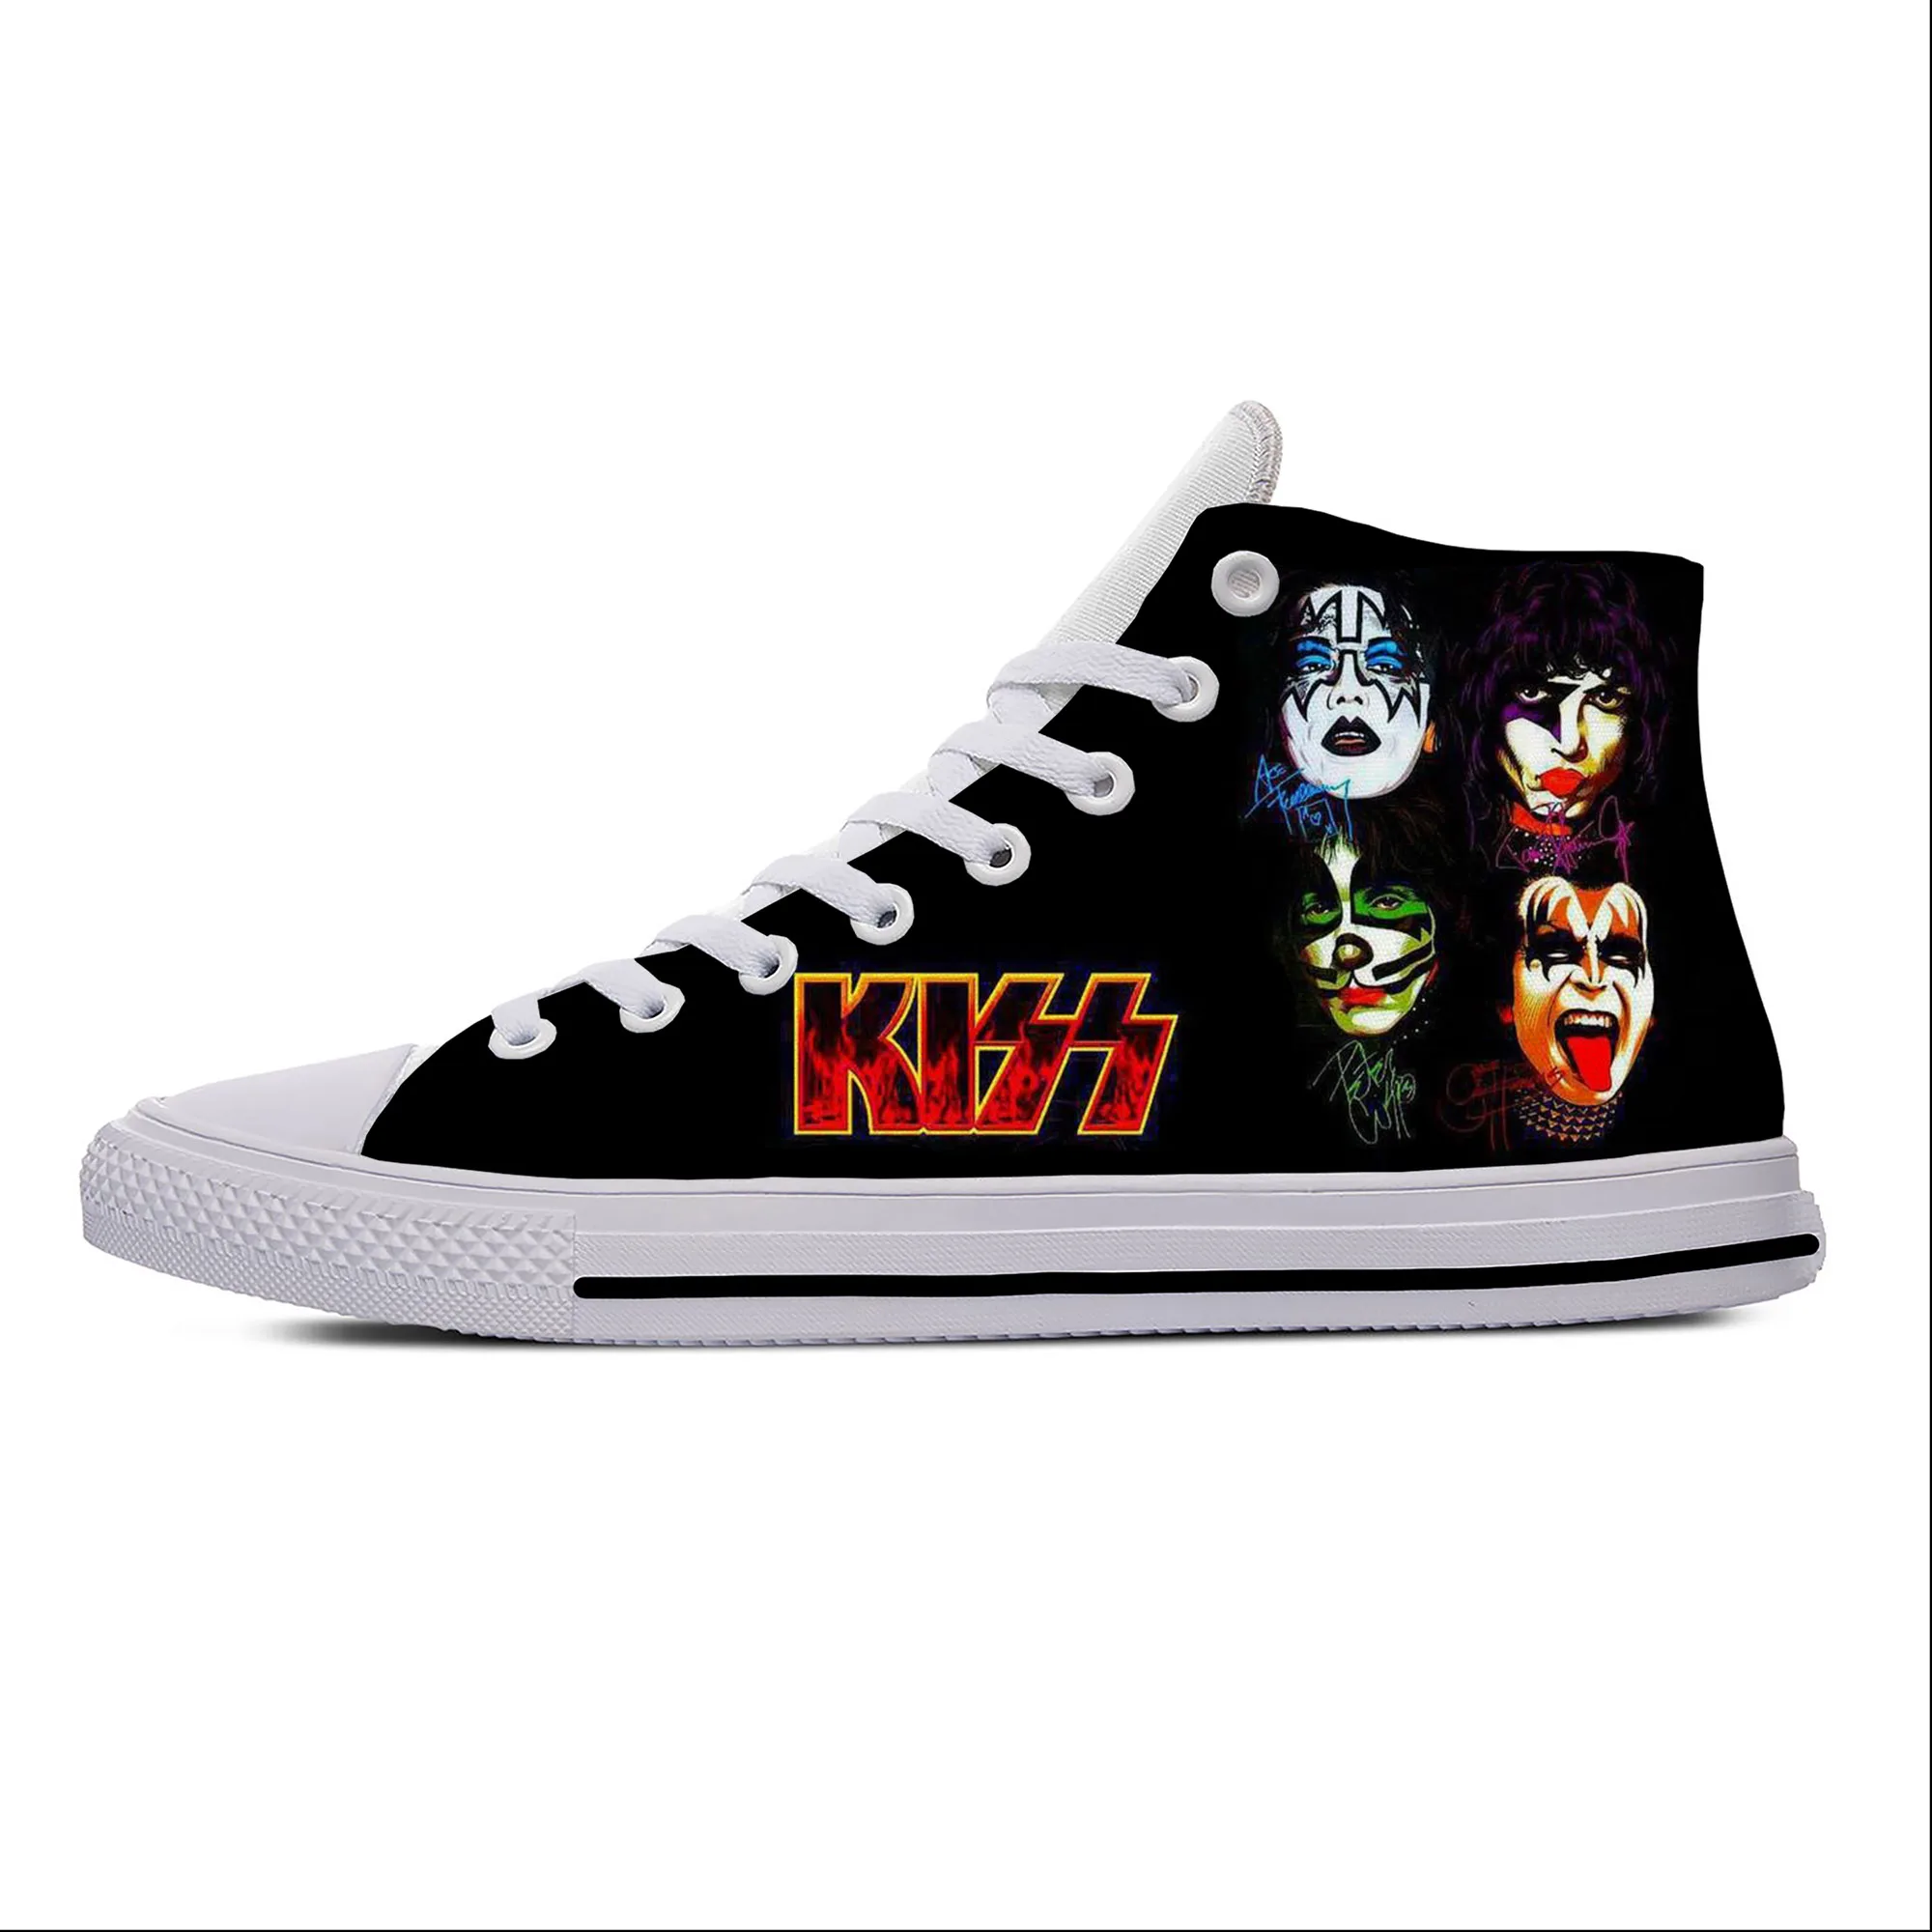 Heavy Metal Rock Band Kiss Music Fashion Funny Casual Cloth Shoes High Top Lightweight Breathable 3D Print Men Women Sneakers cloocl newest rock metal kiss band trousers 3d print men women hip hop harajuku fashion casual style pants drop shipping